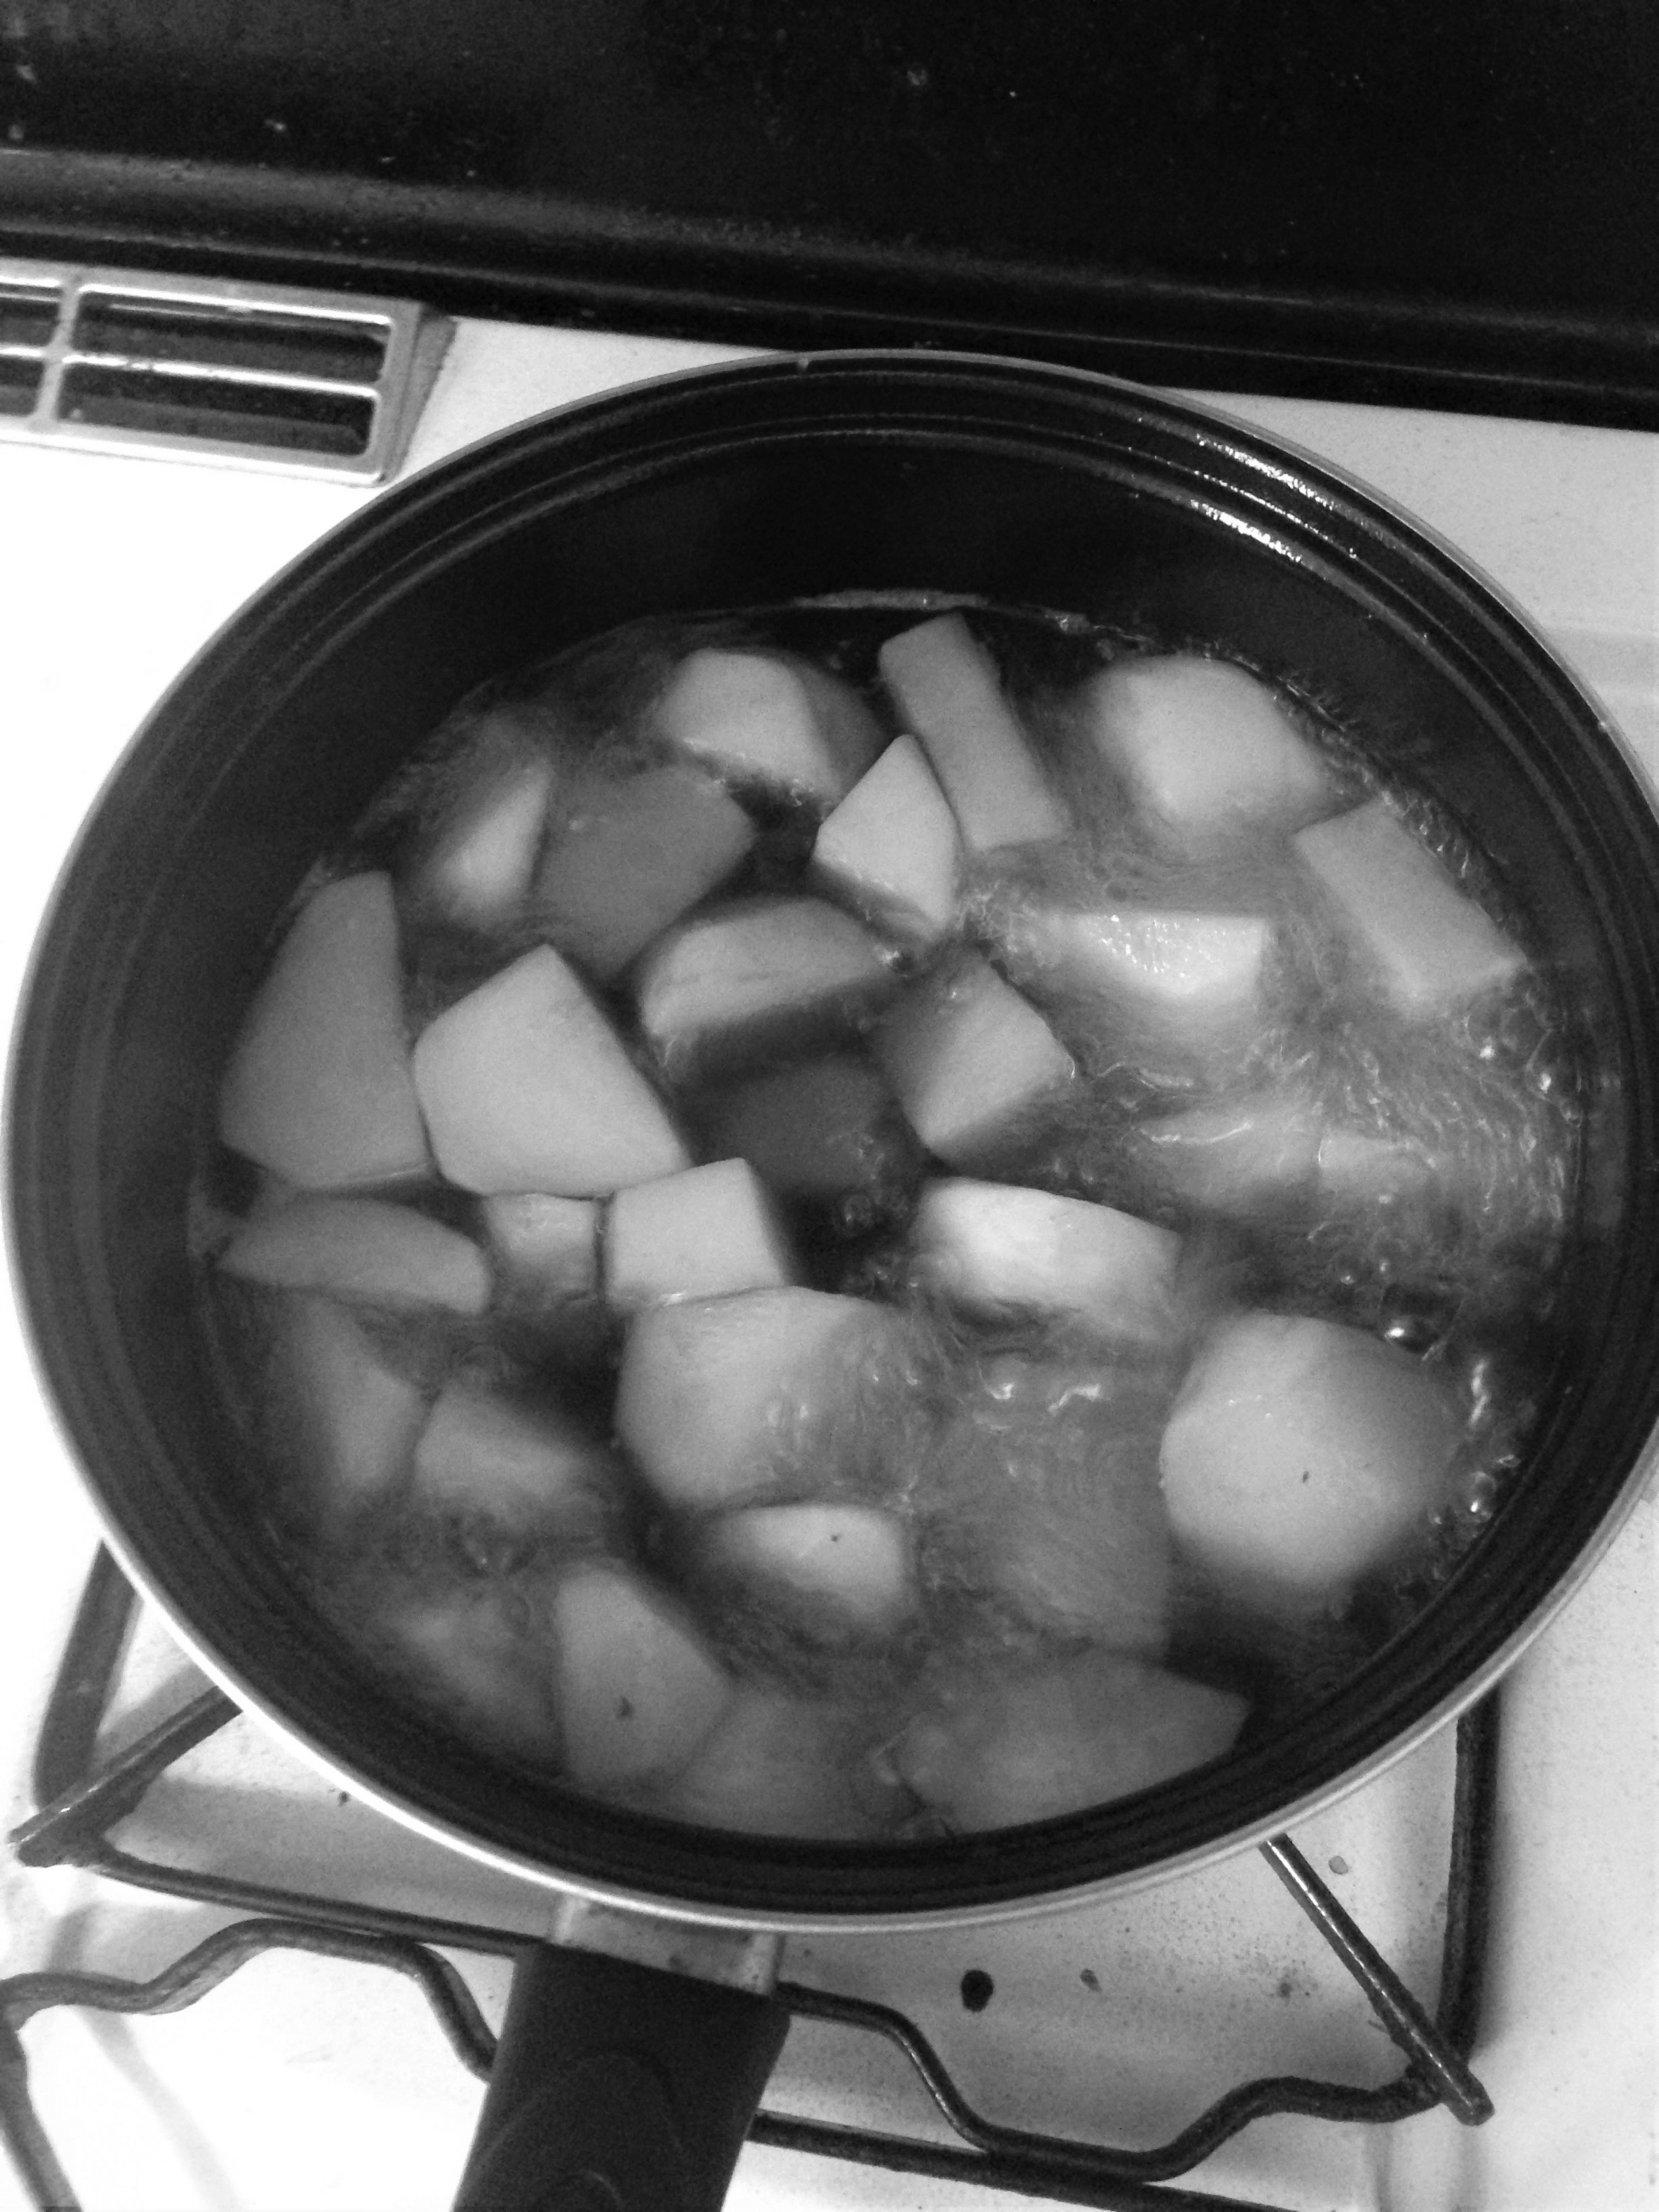 Boiling turnips (black and white)